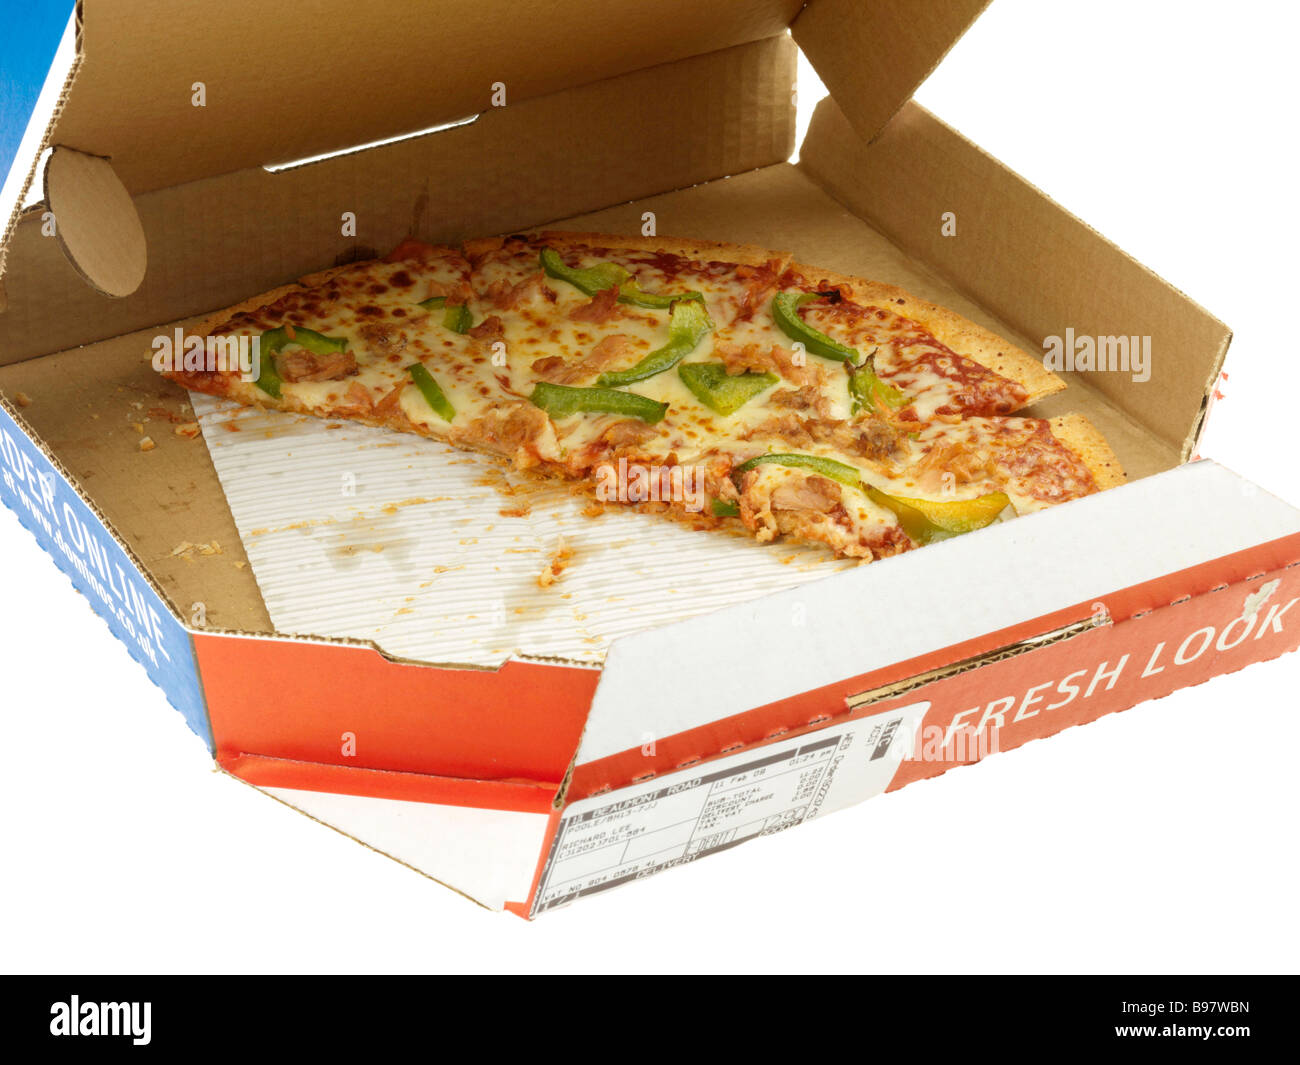 Branded Dominos Takeaway Home Delivery Pizza Carton Or Box  Isolated Against A White Background With No People And A Clipping Path Stock Photo